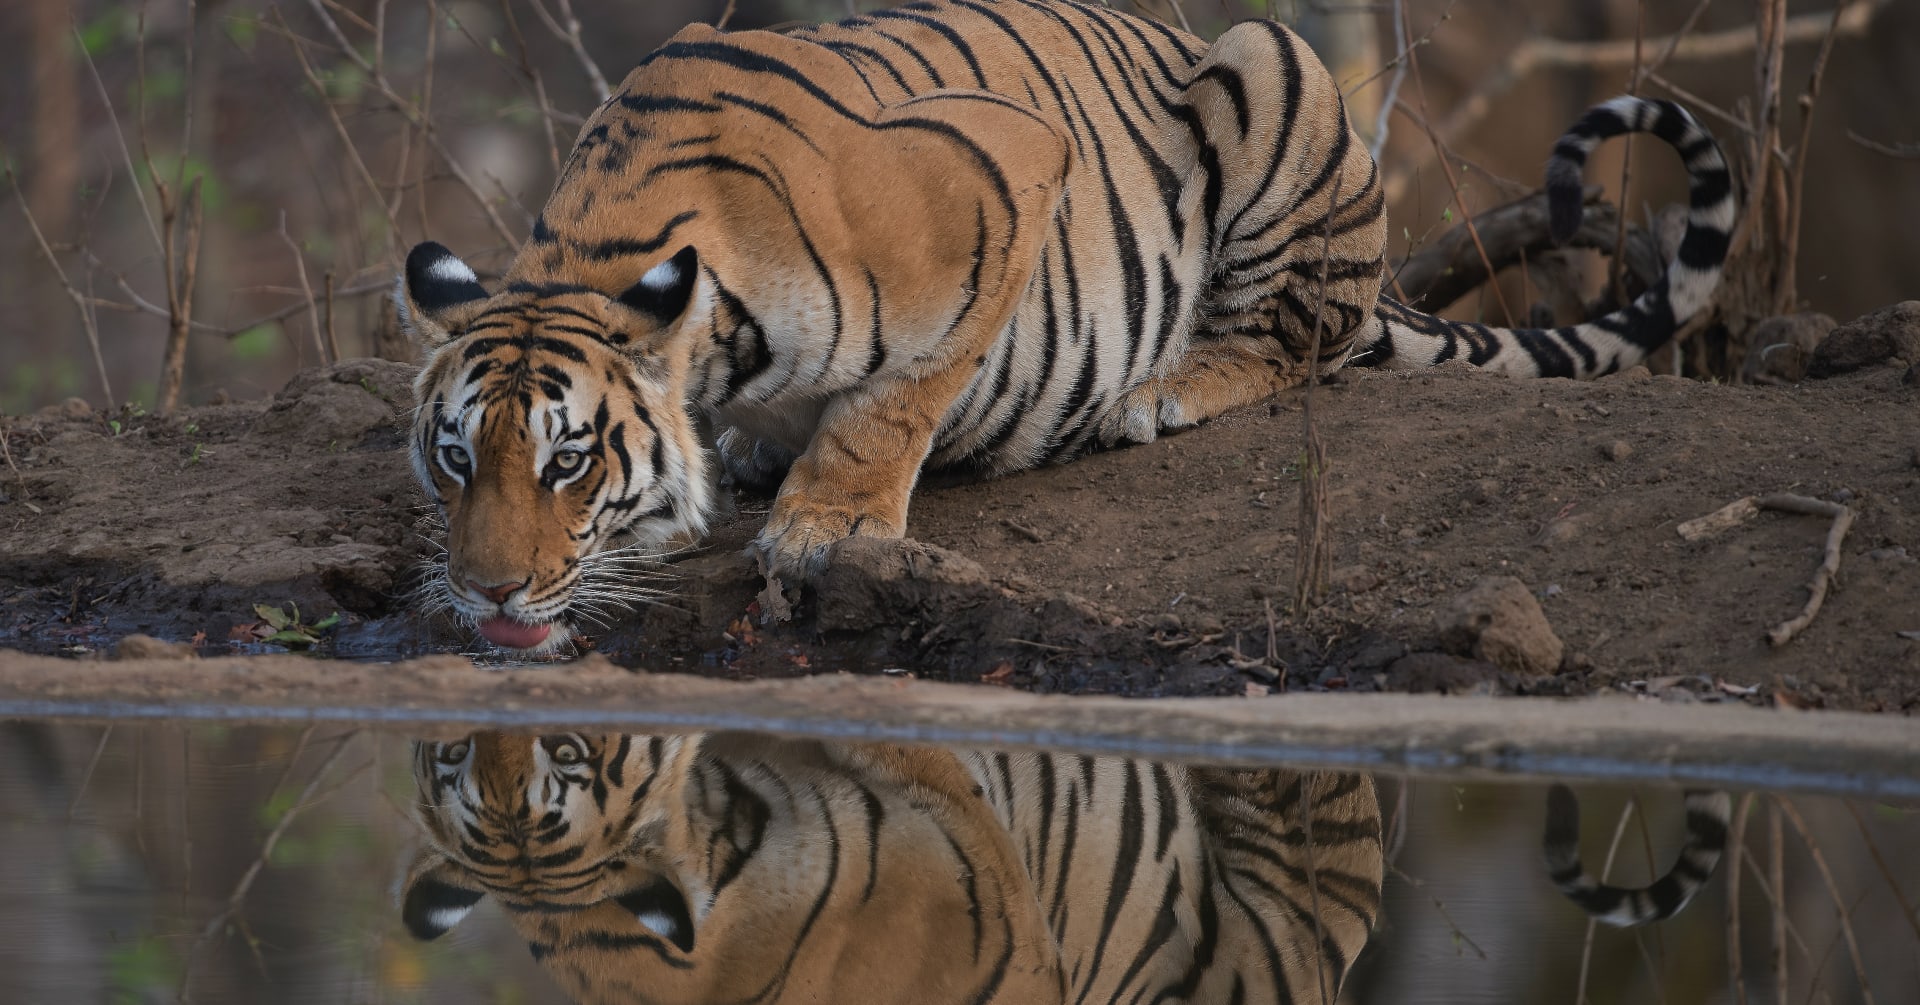 The best places to see tigers in India